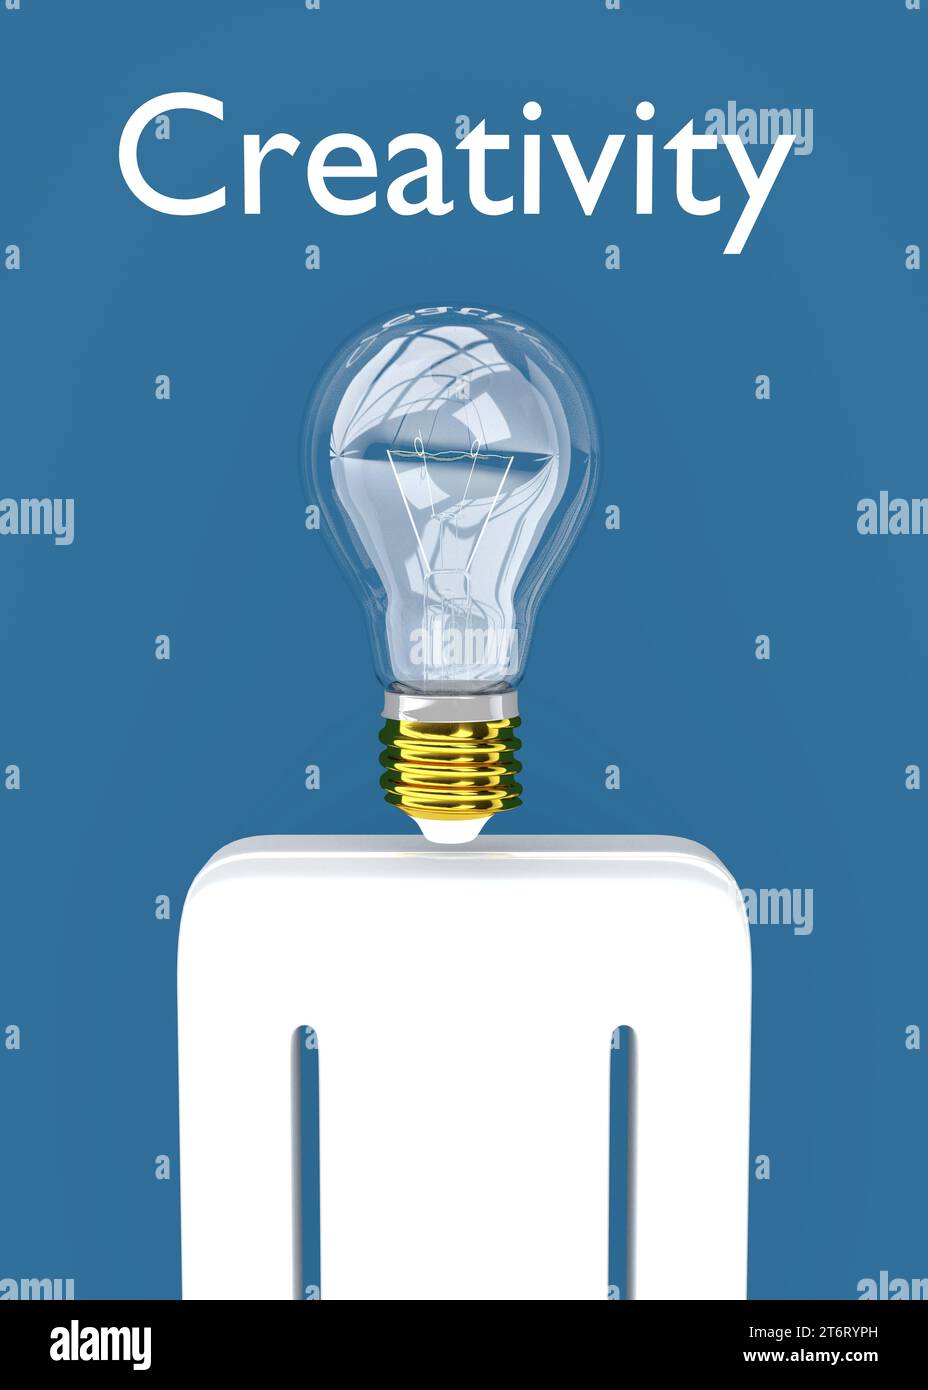 3D illustration of silhouette of a man whose head is symbolically replaced by a light bulb, title as Creativity. Stock Photo